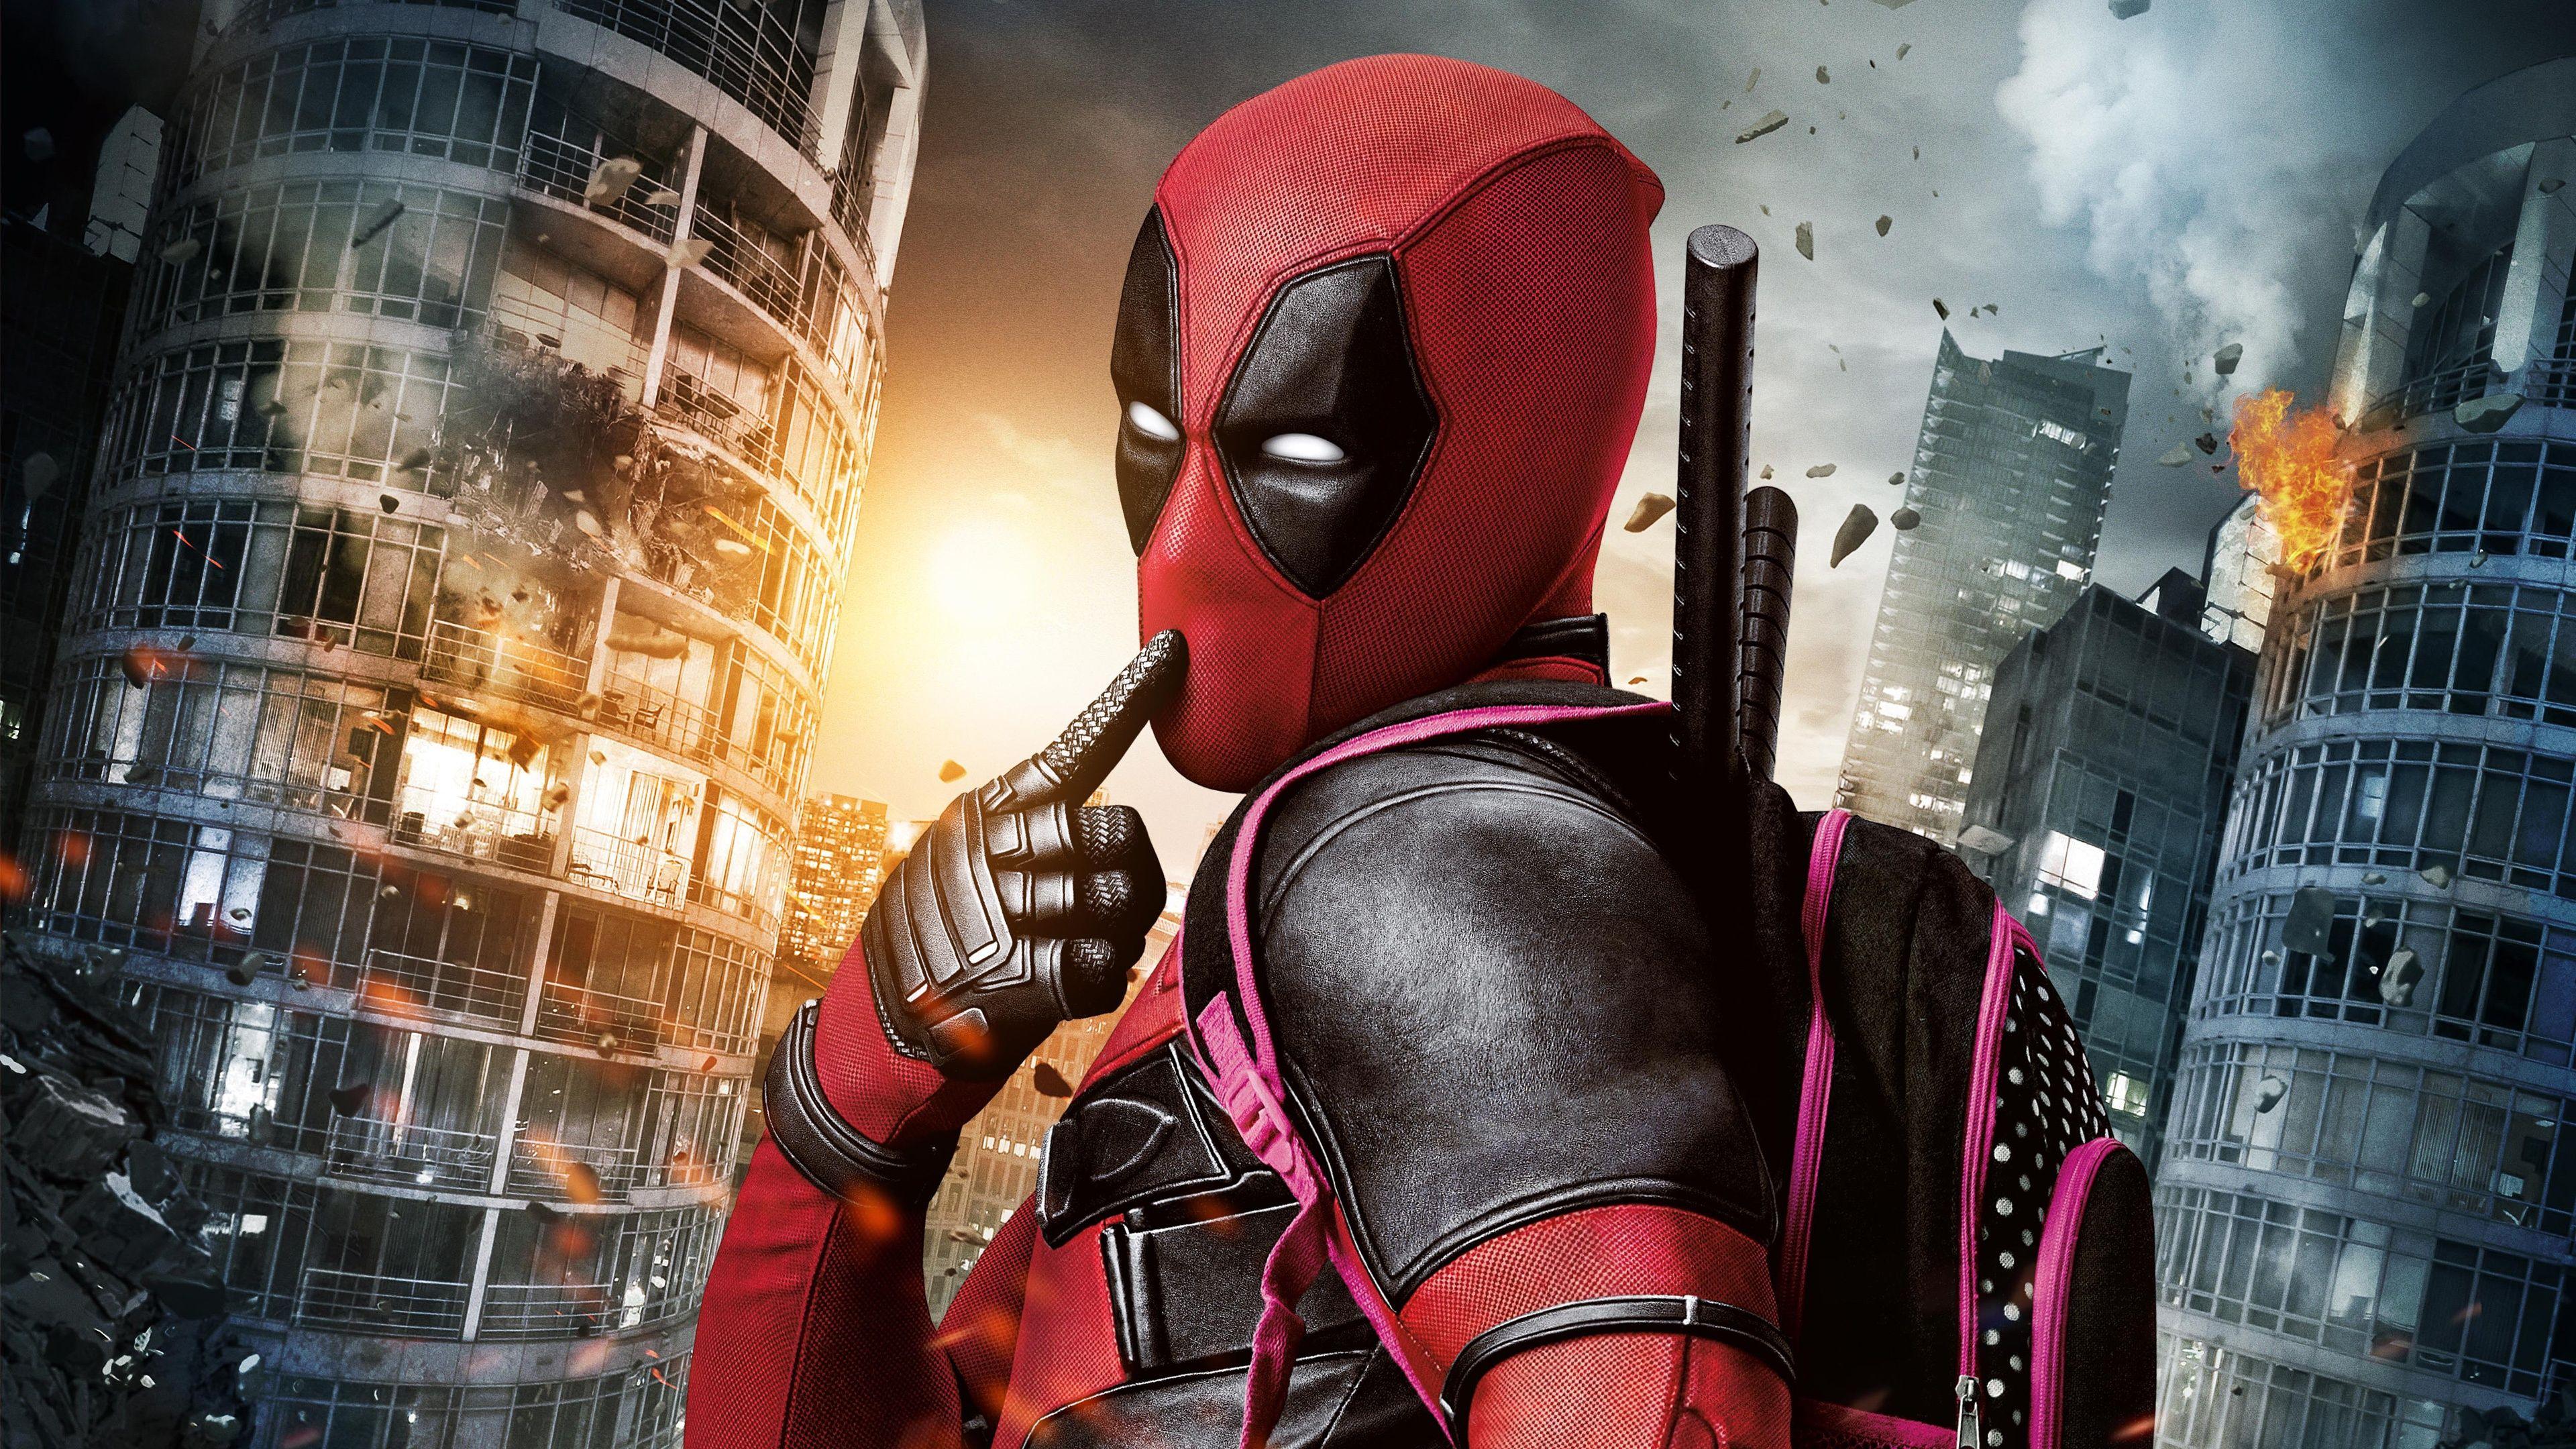 Deadpool Movie Wallpapers Top Free Deadpool Movie Backgrounds Wallpaperaccess